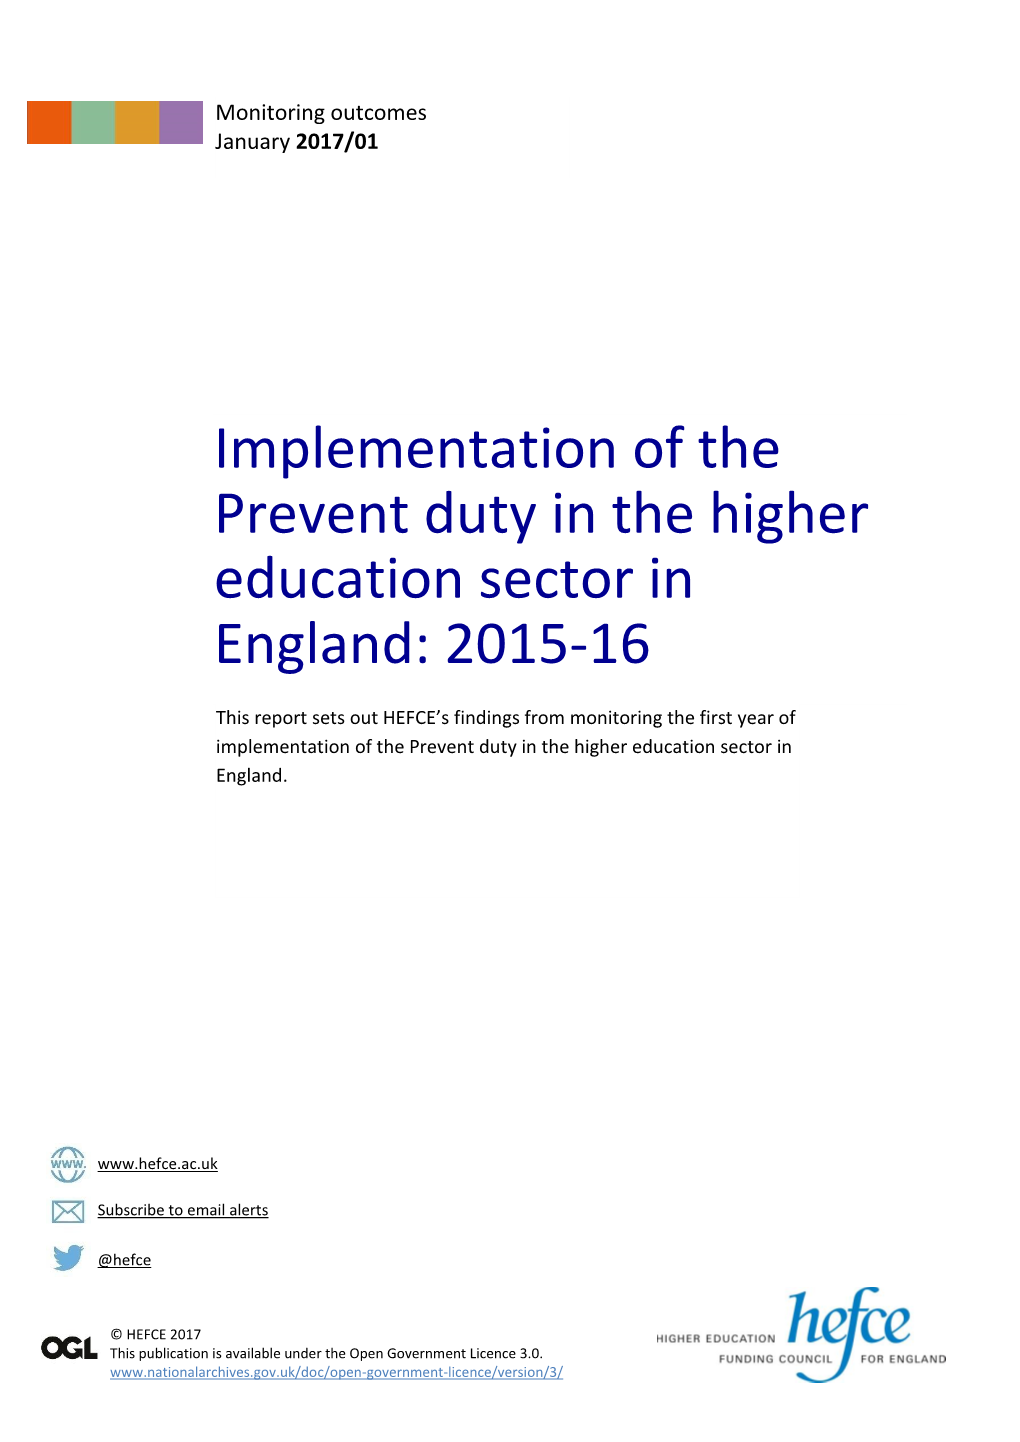 Implementation of the Prevent Duty in the Higher Education Sector in England